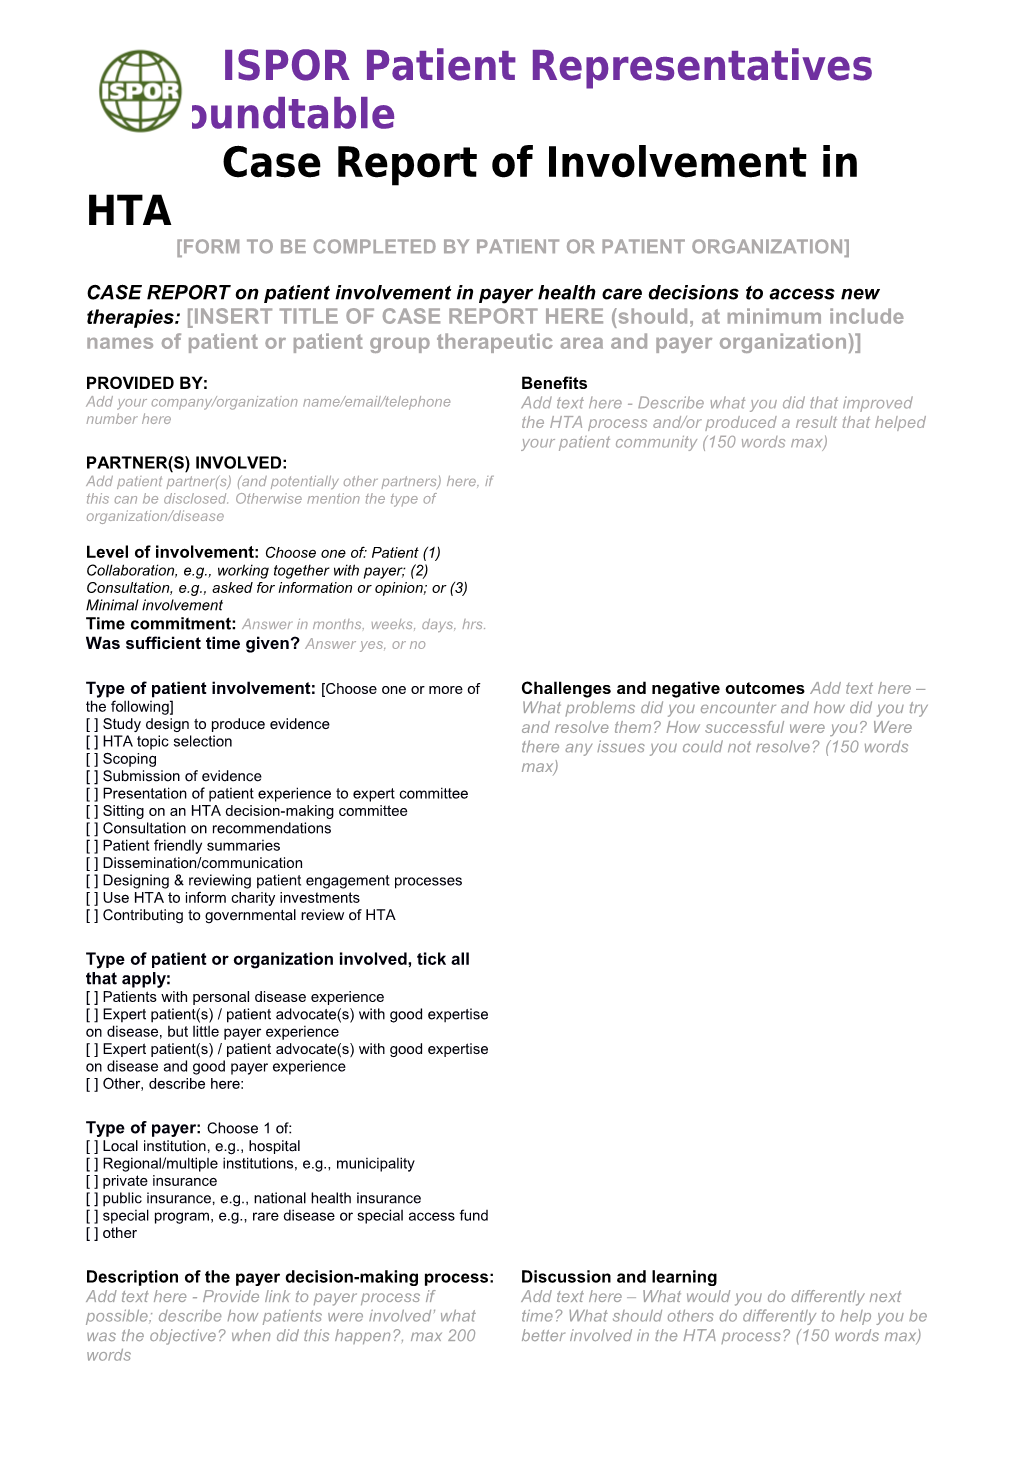 Form to Be Completed by Patient Or Patient Organization